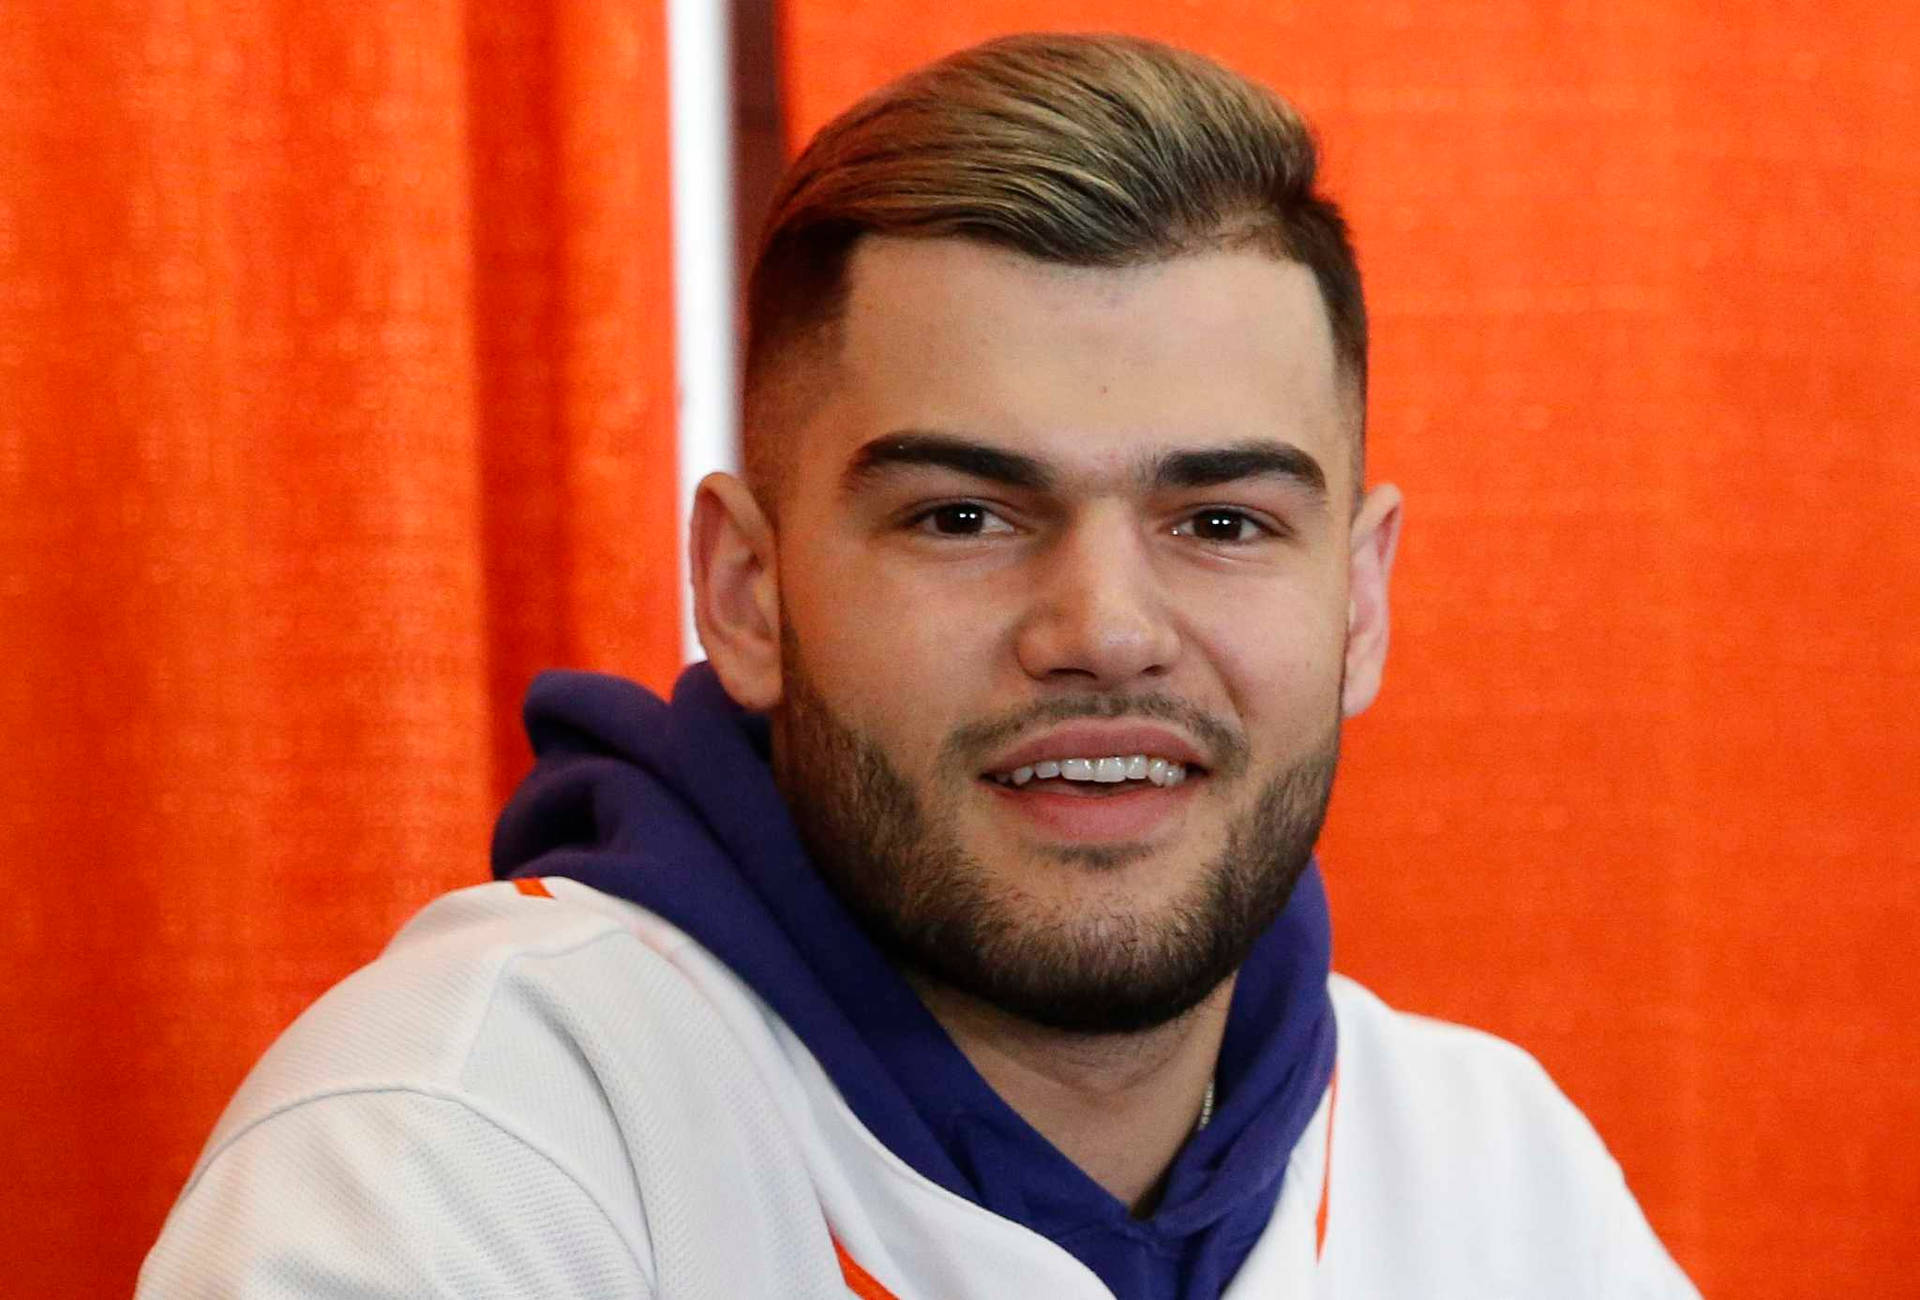 Lancemccullers Ren Frisyr (for A Computer Or Mobile Wallpaper Featuring An Image Of Lance Mccullers With A Clean Haircut) Wallpaper